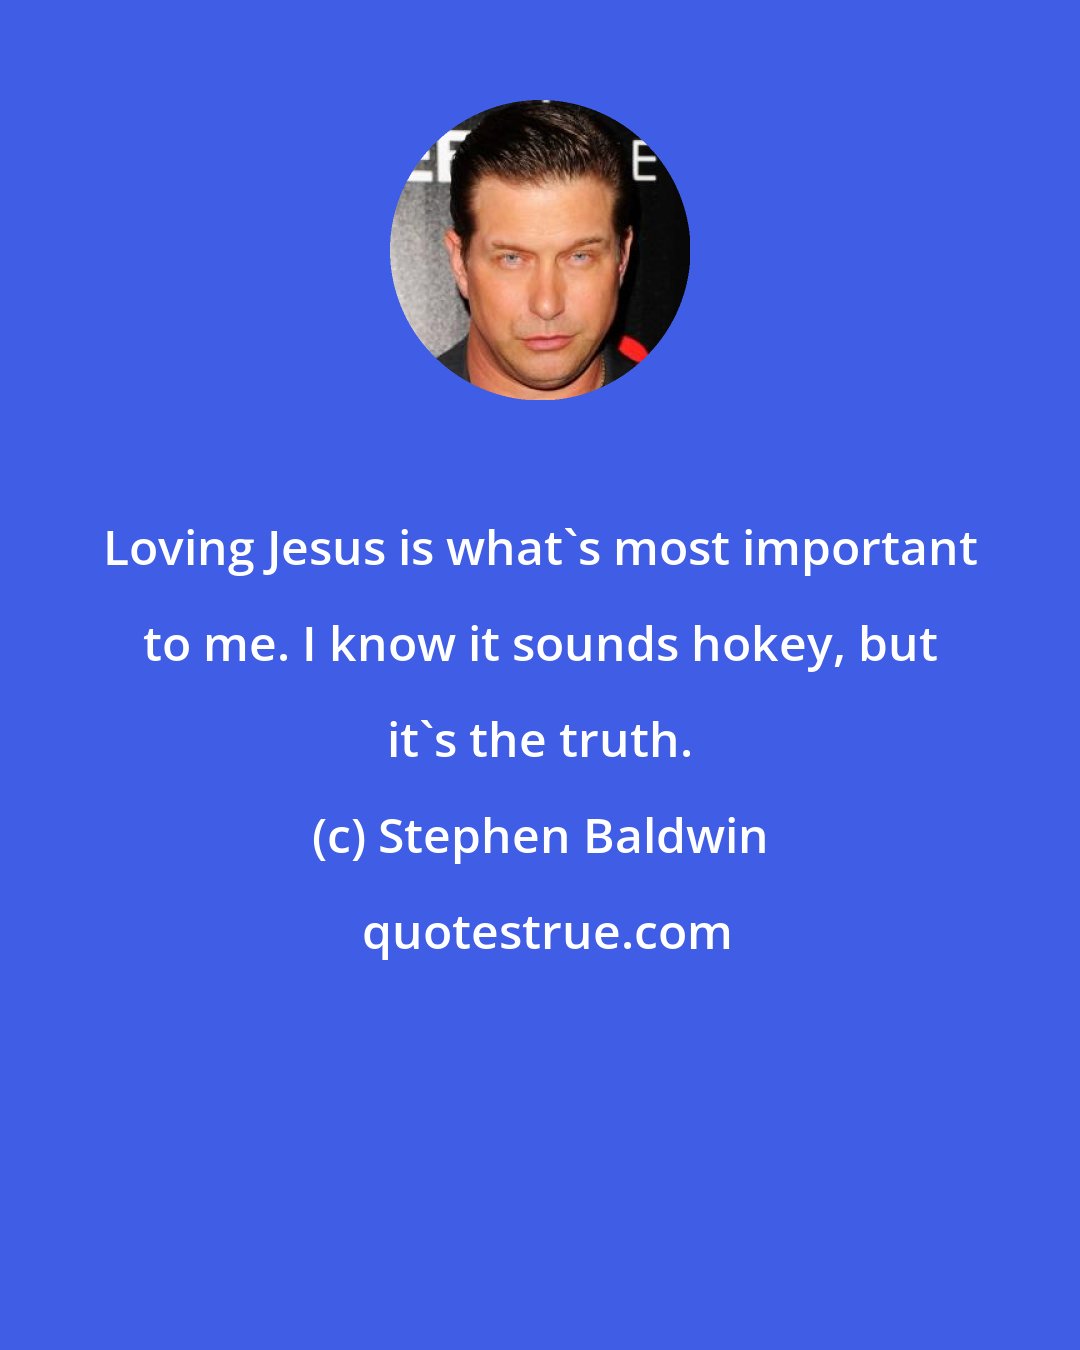 Stephen Baldwin: Loving Jesus is what's most important to me. I know it sounds hokey, but it's the truth.